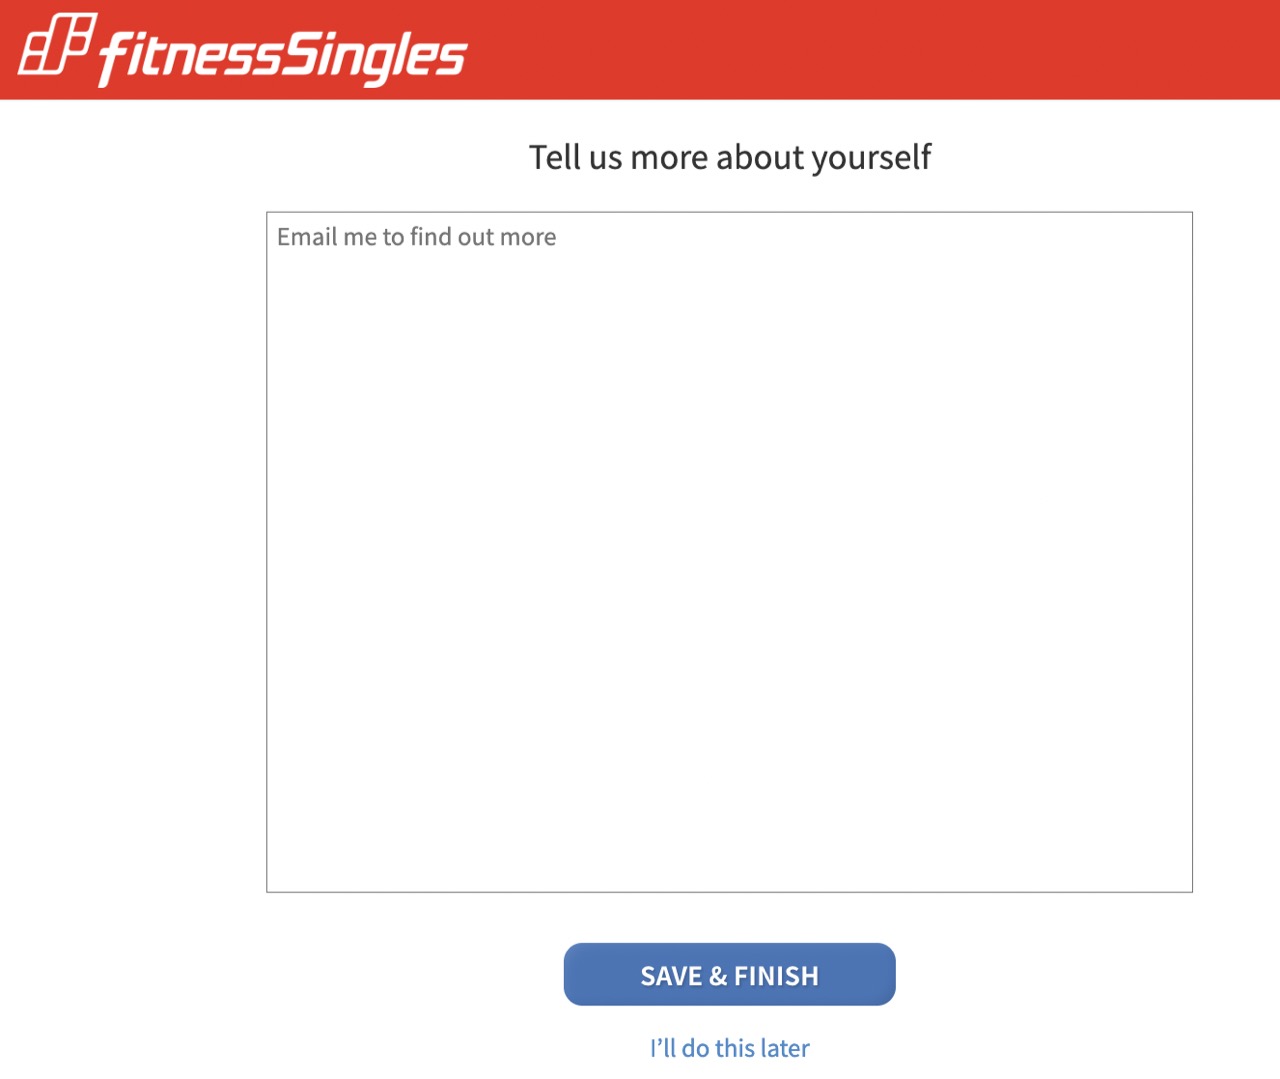 fitnesssingles-review-signup-33